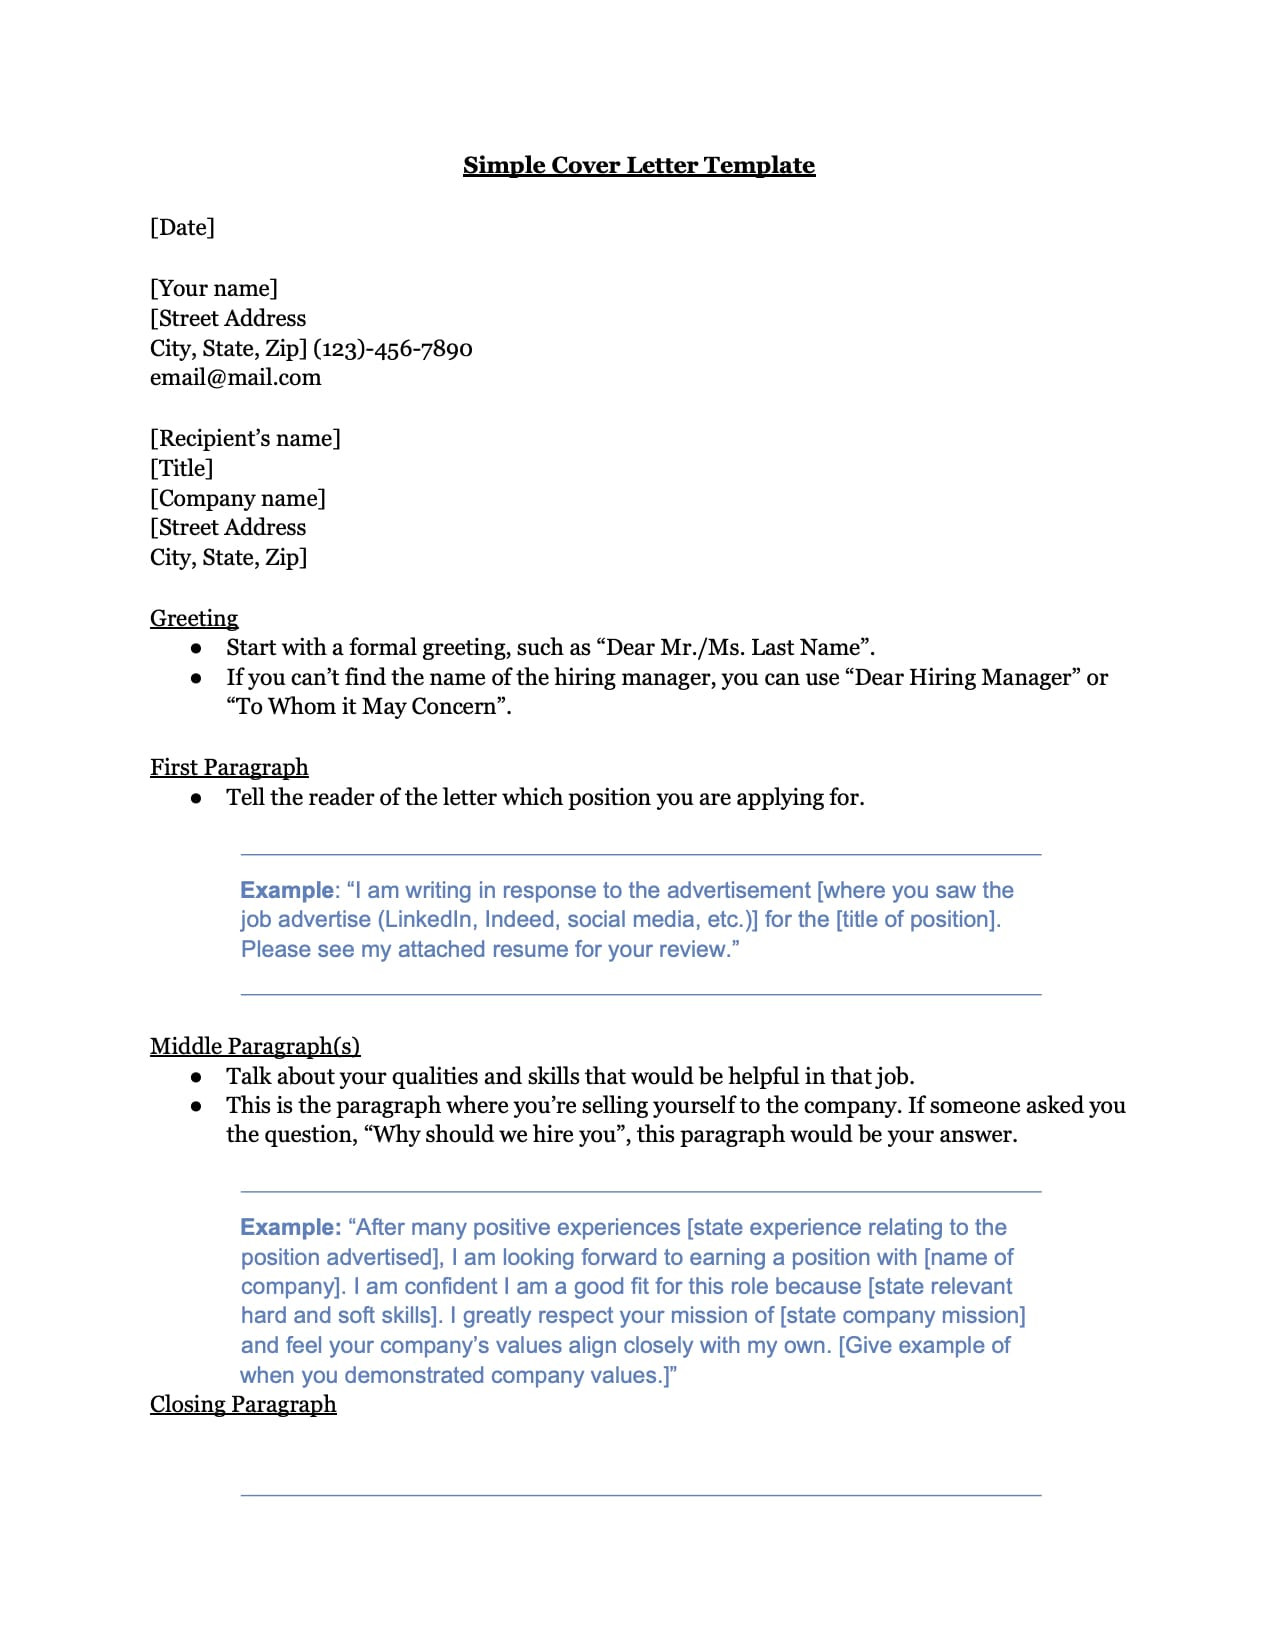 Email Samples when You Send the Wrong Resume Cover Letter Templates From Jobscan